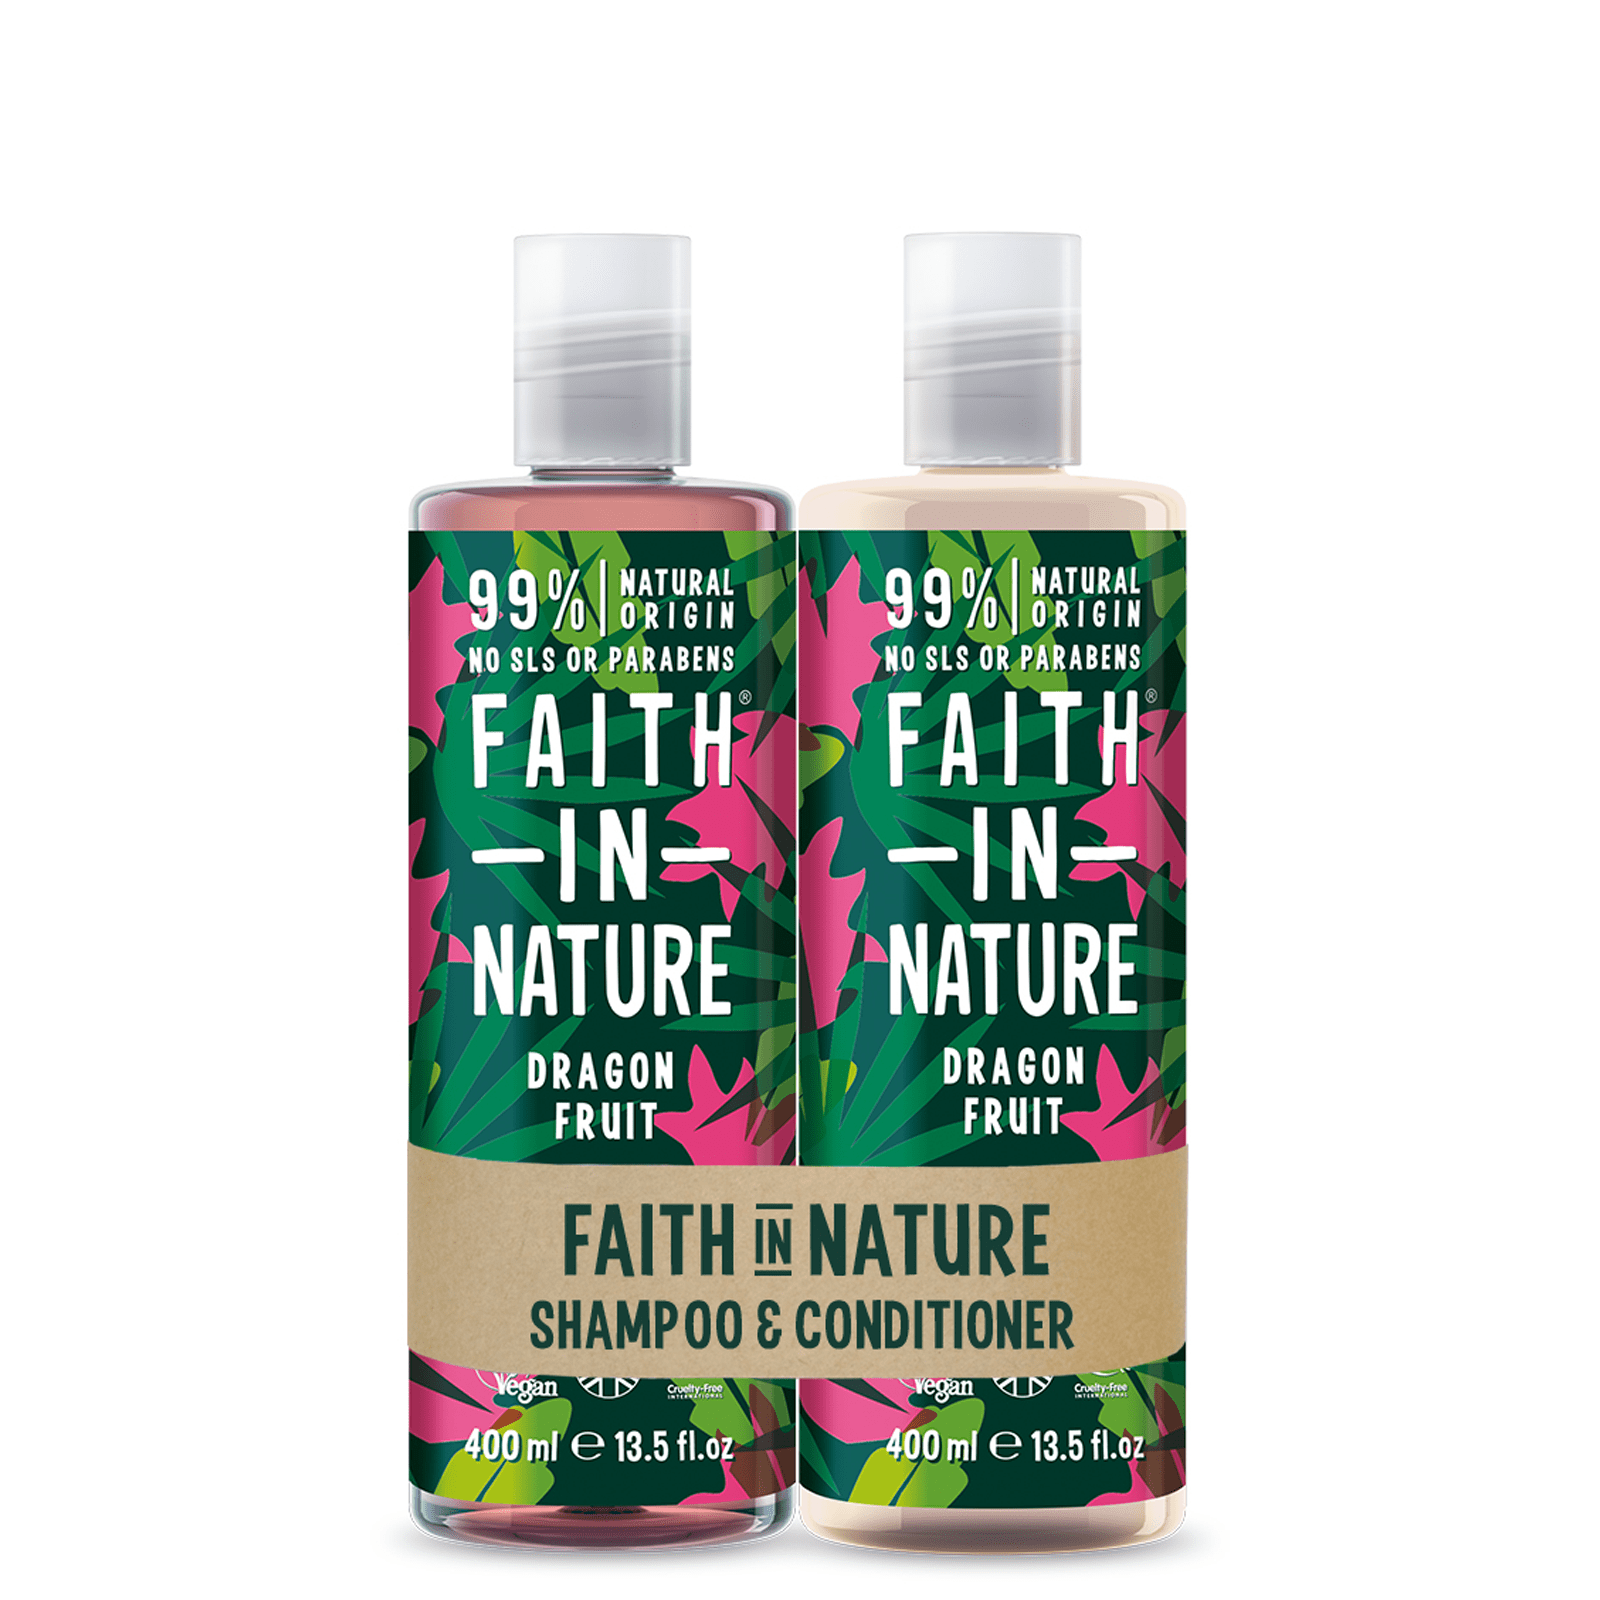 Faith in Nature Dragon Fruit Shampoo & Conditioner Banded Pack  2 x 400ml